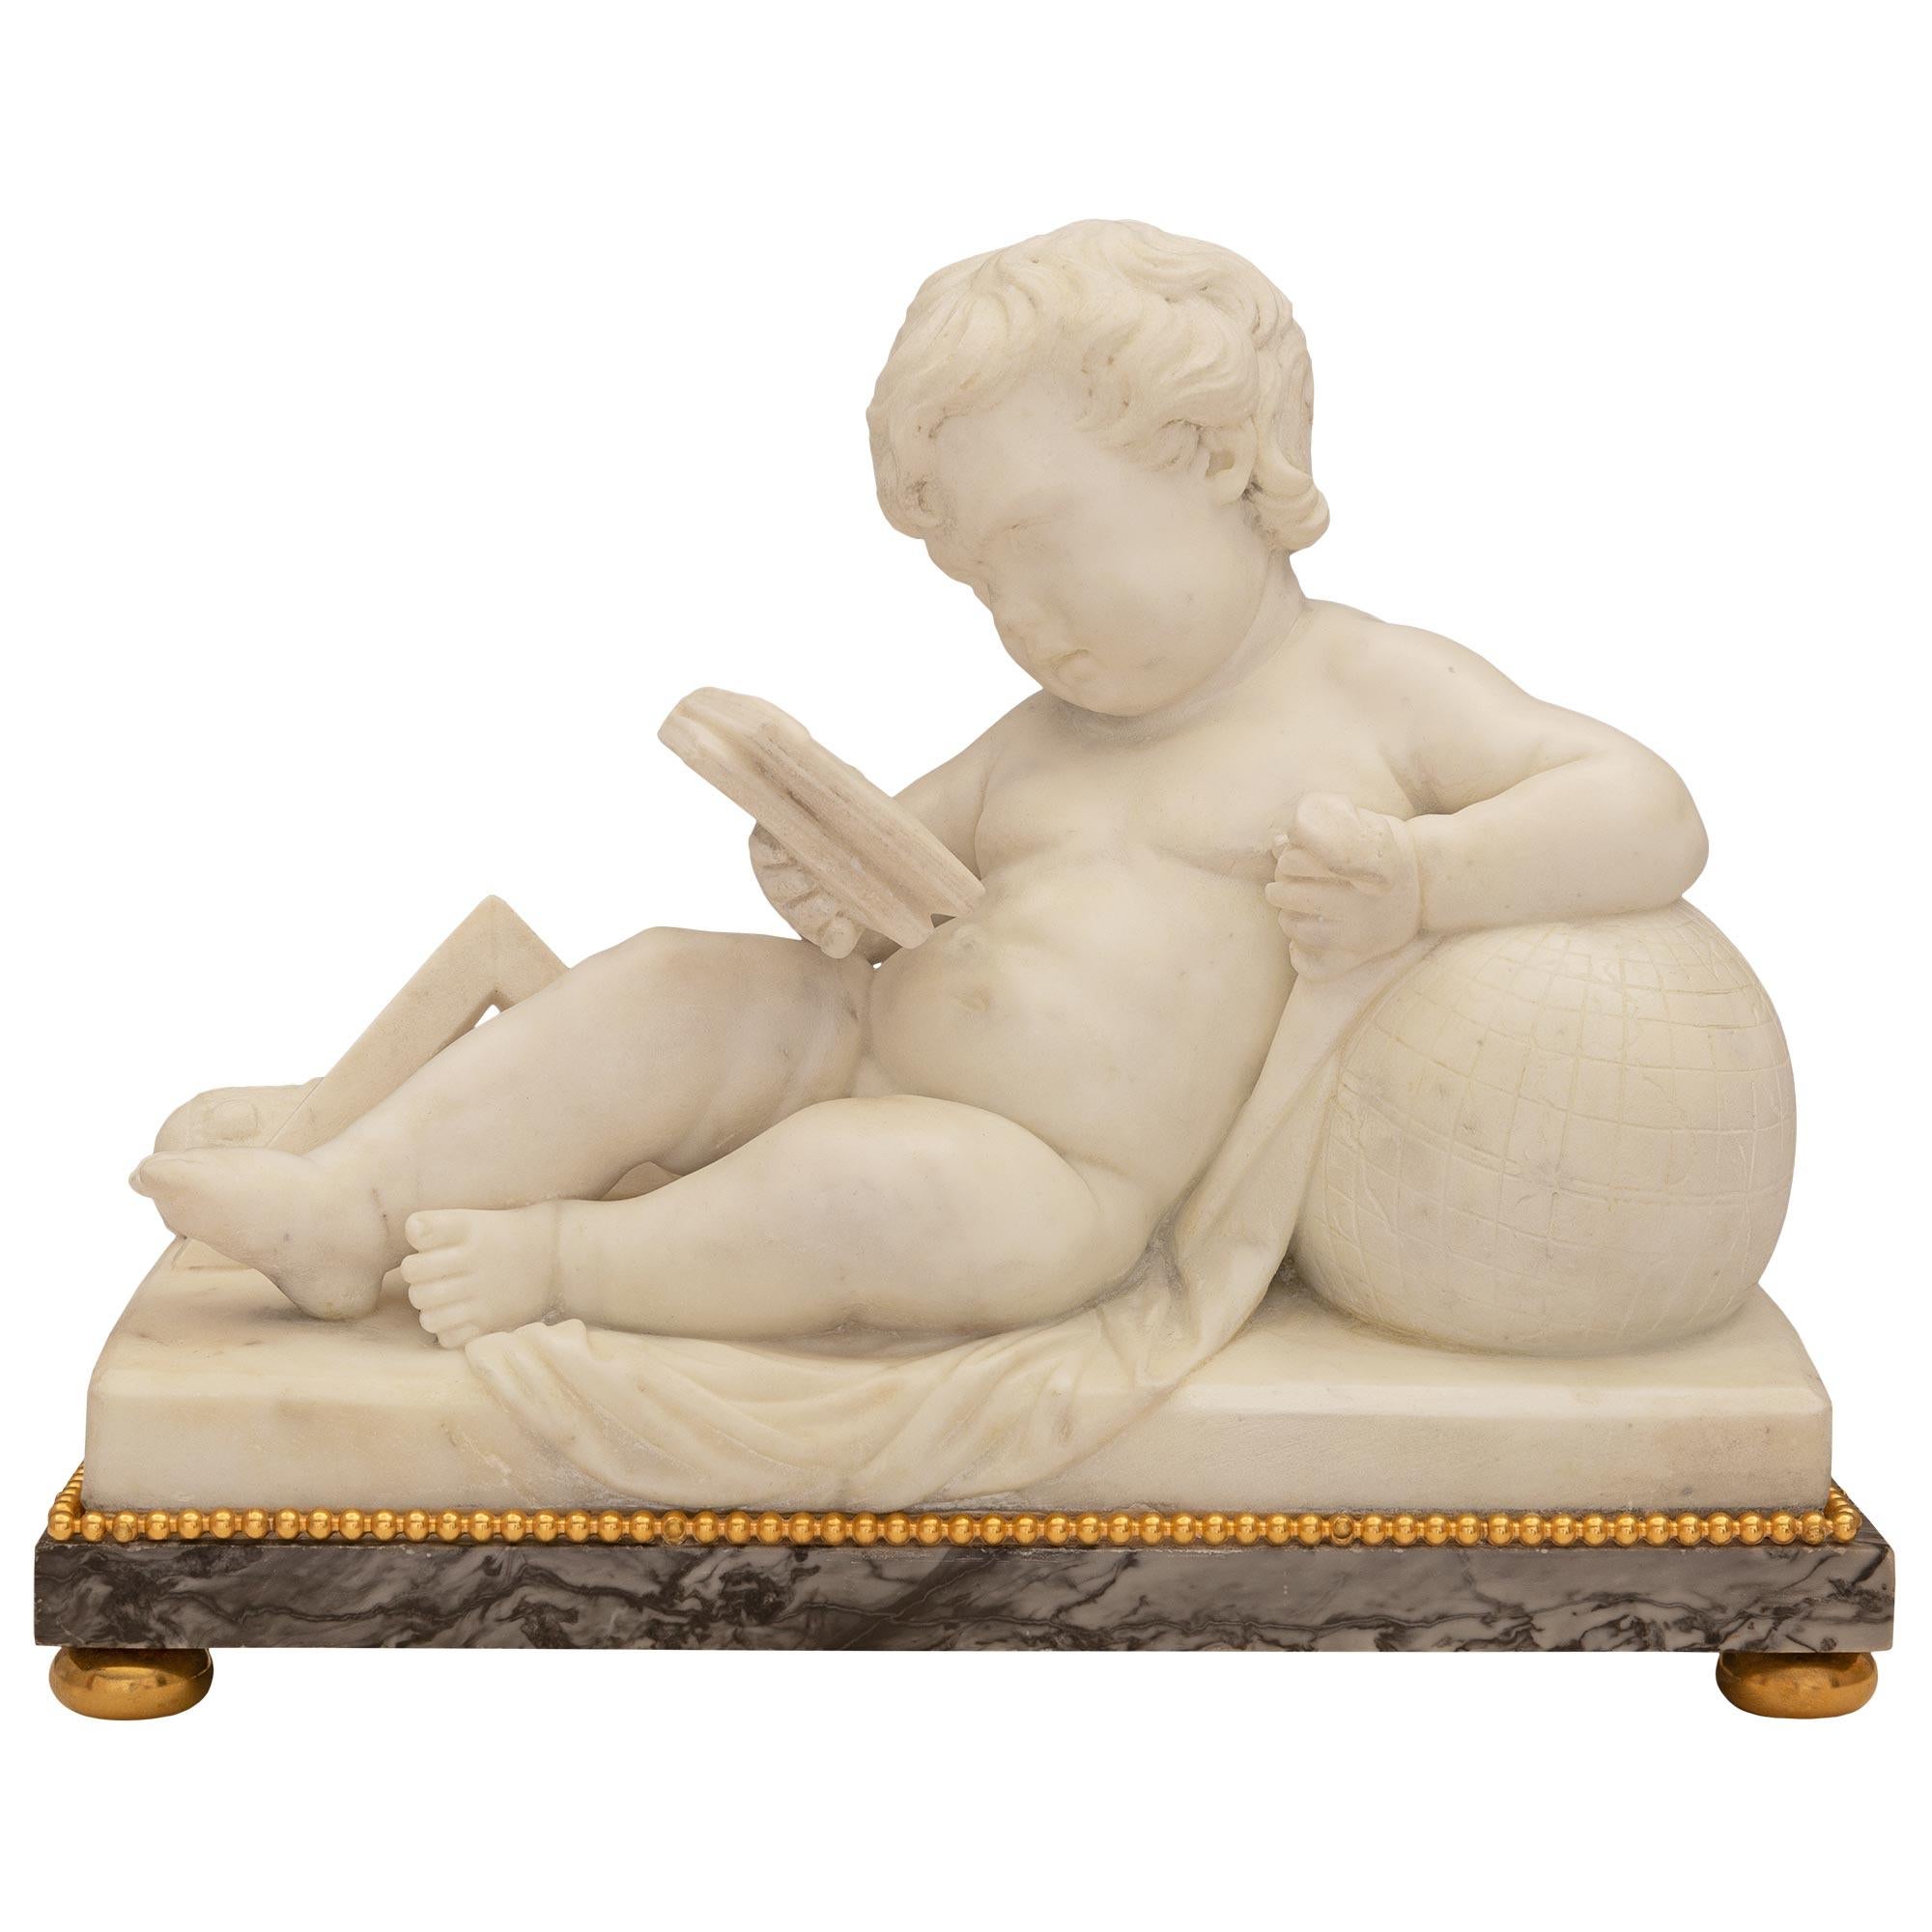 A charming and wonderfully executed Italian 19th century white Carrara marble, Gris St. Anne marble, and ormolu statue. The statue is raised by elegant ormolu bun feet below the rectangular Gris St. Anne marble base. The statue above depicts a young